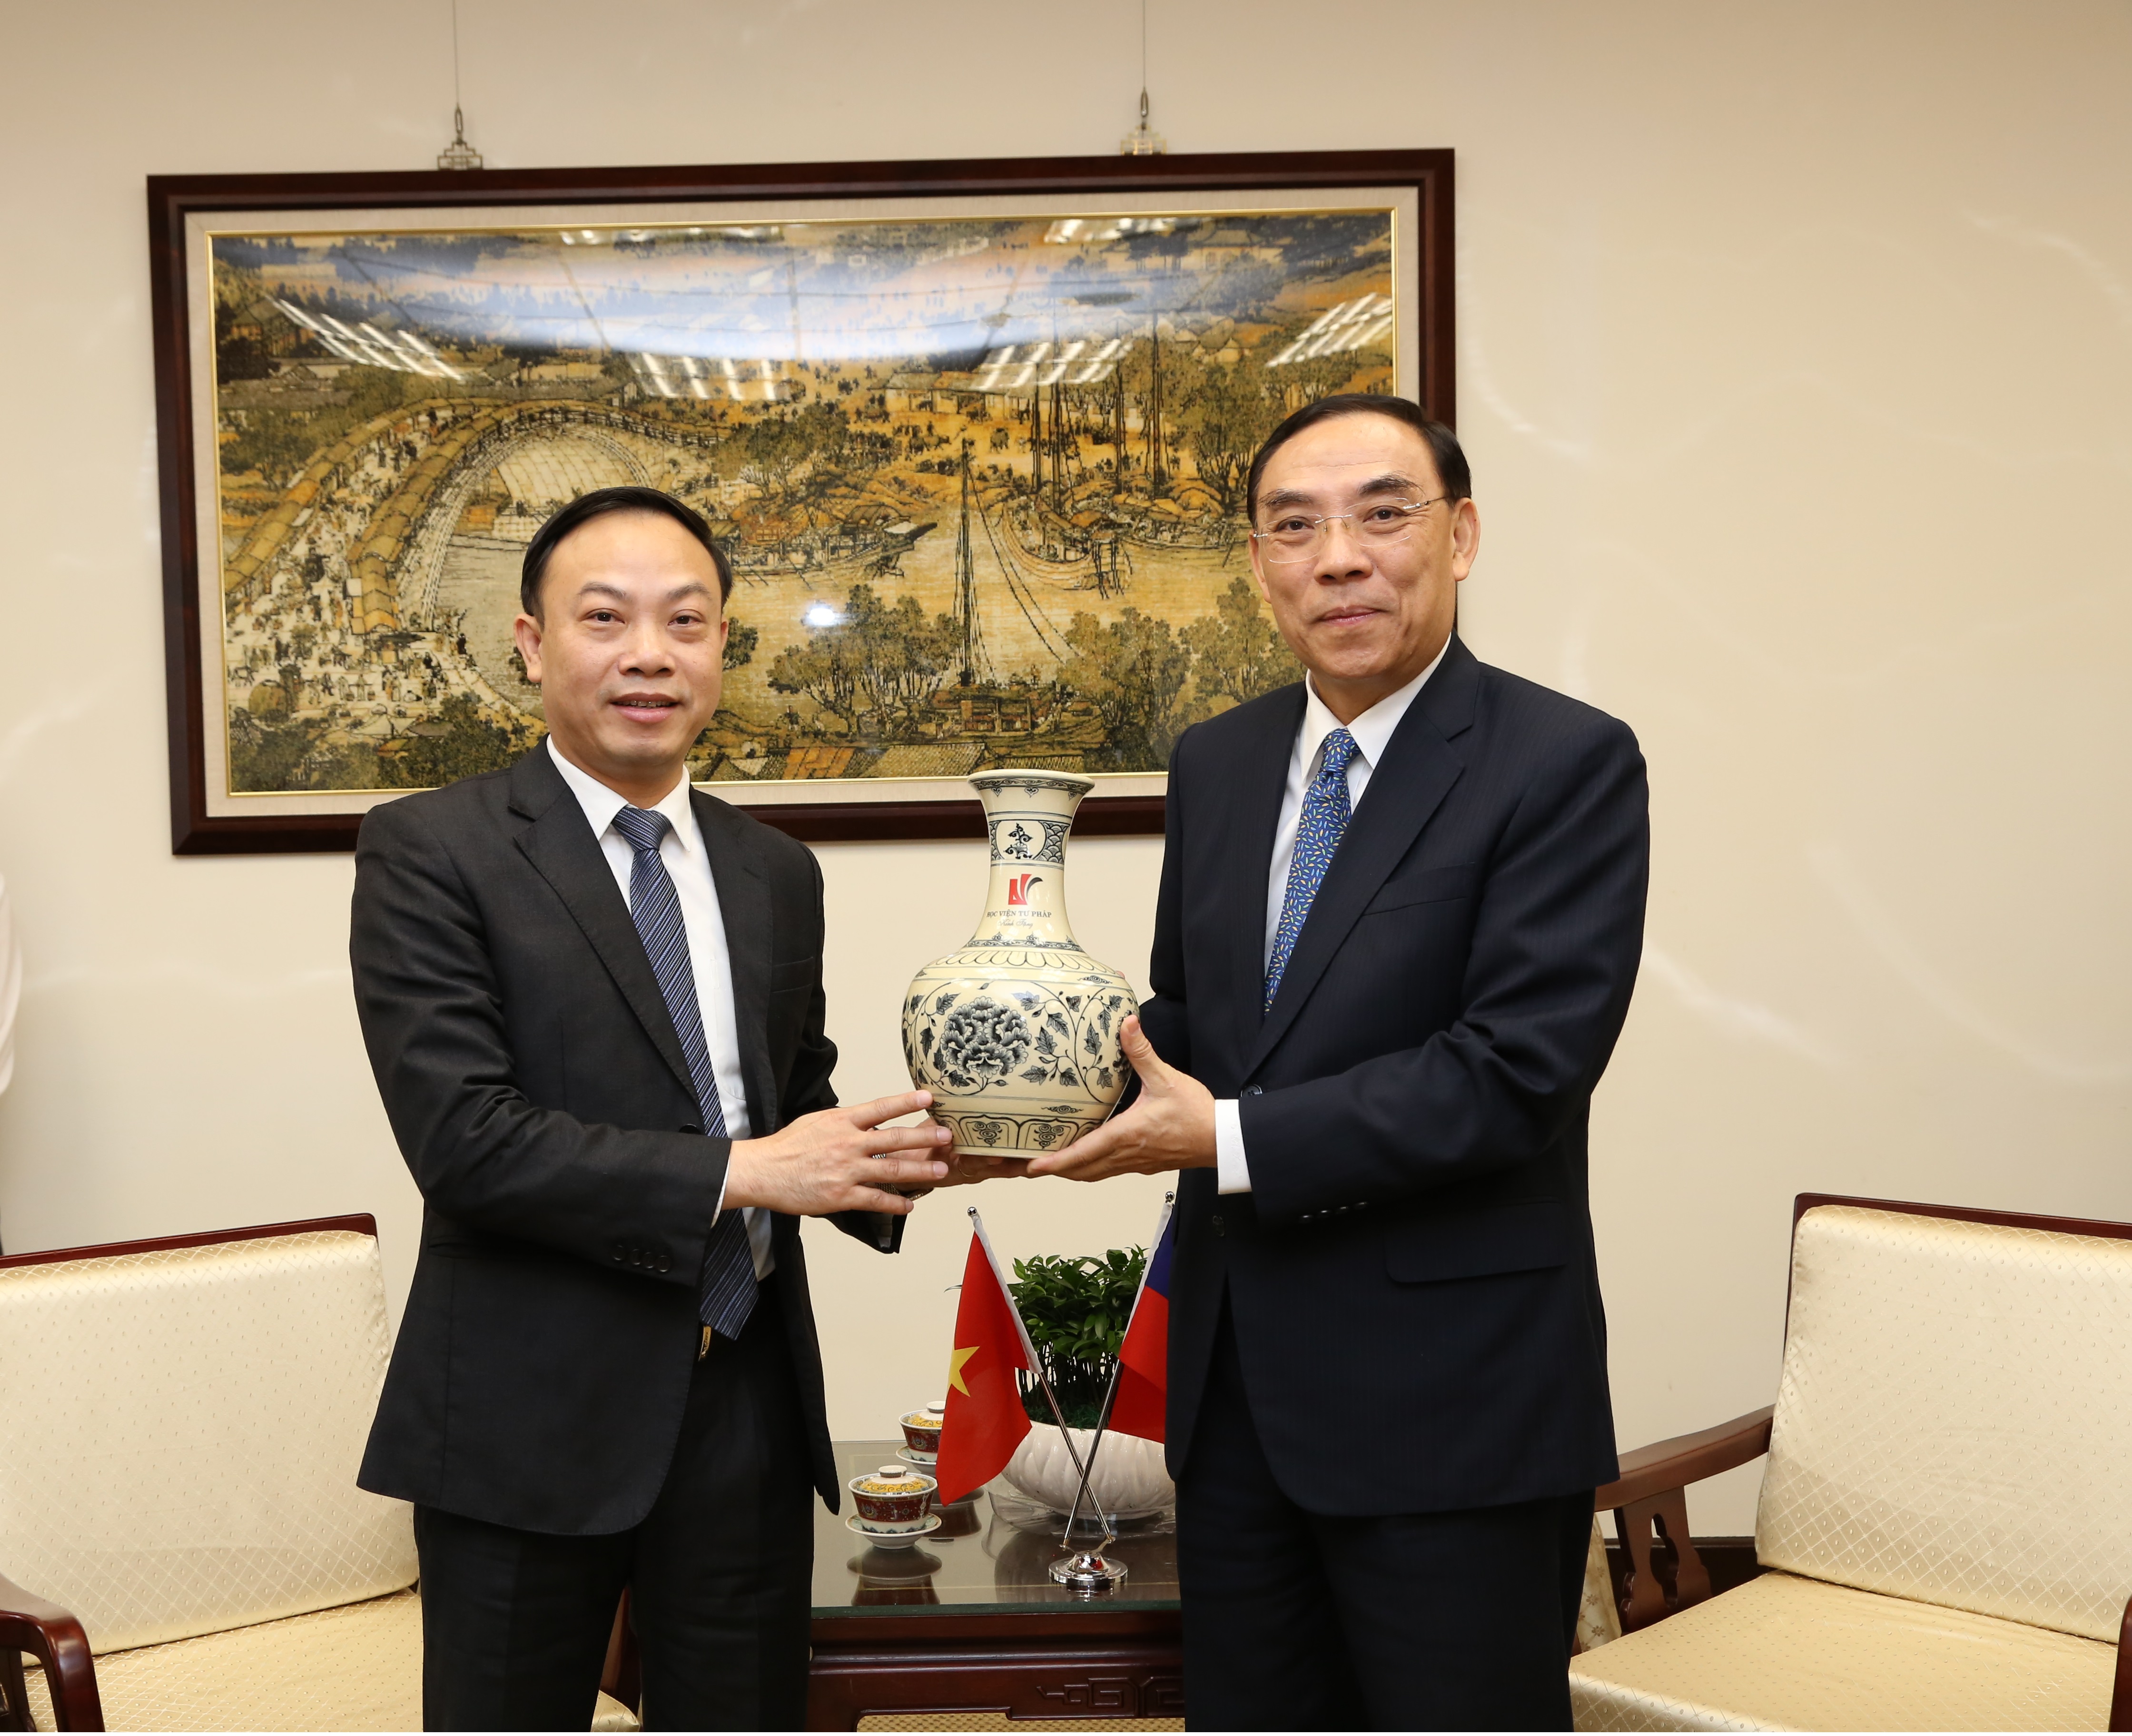 A delegation led by Mr. Nguyen Xuan Thu, Deputy Dean of Judicial Academy in Vietnam, visited MOJ to exchange views on MLA and training programs on Aug. 13, 2019